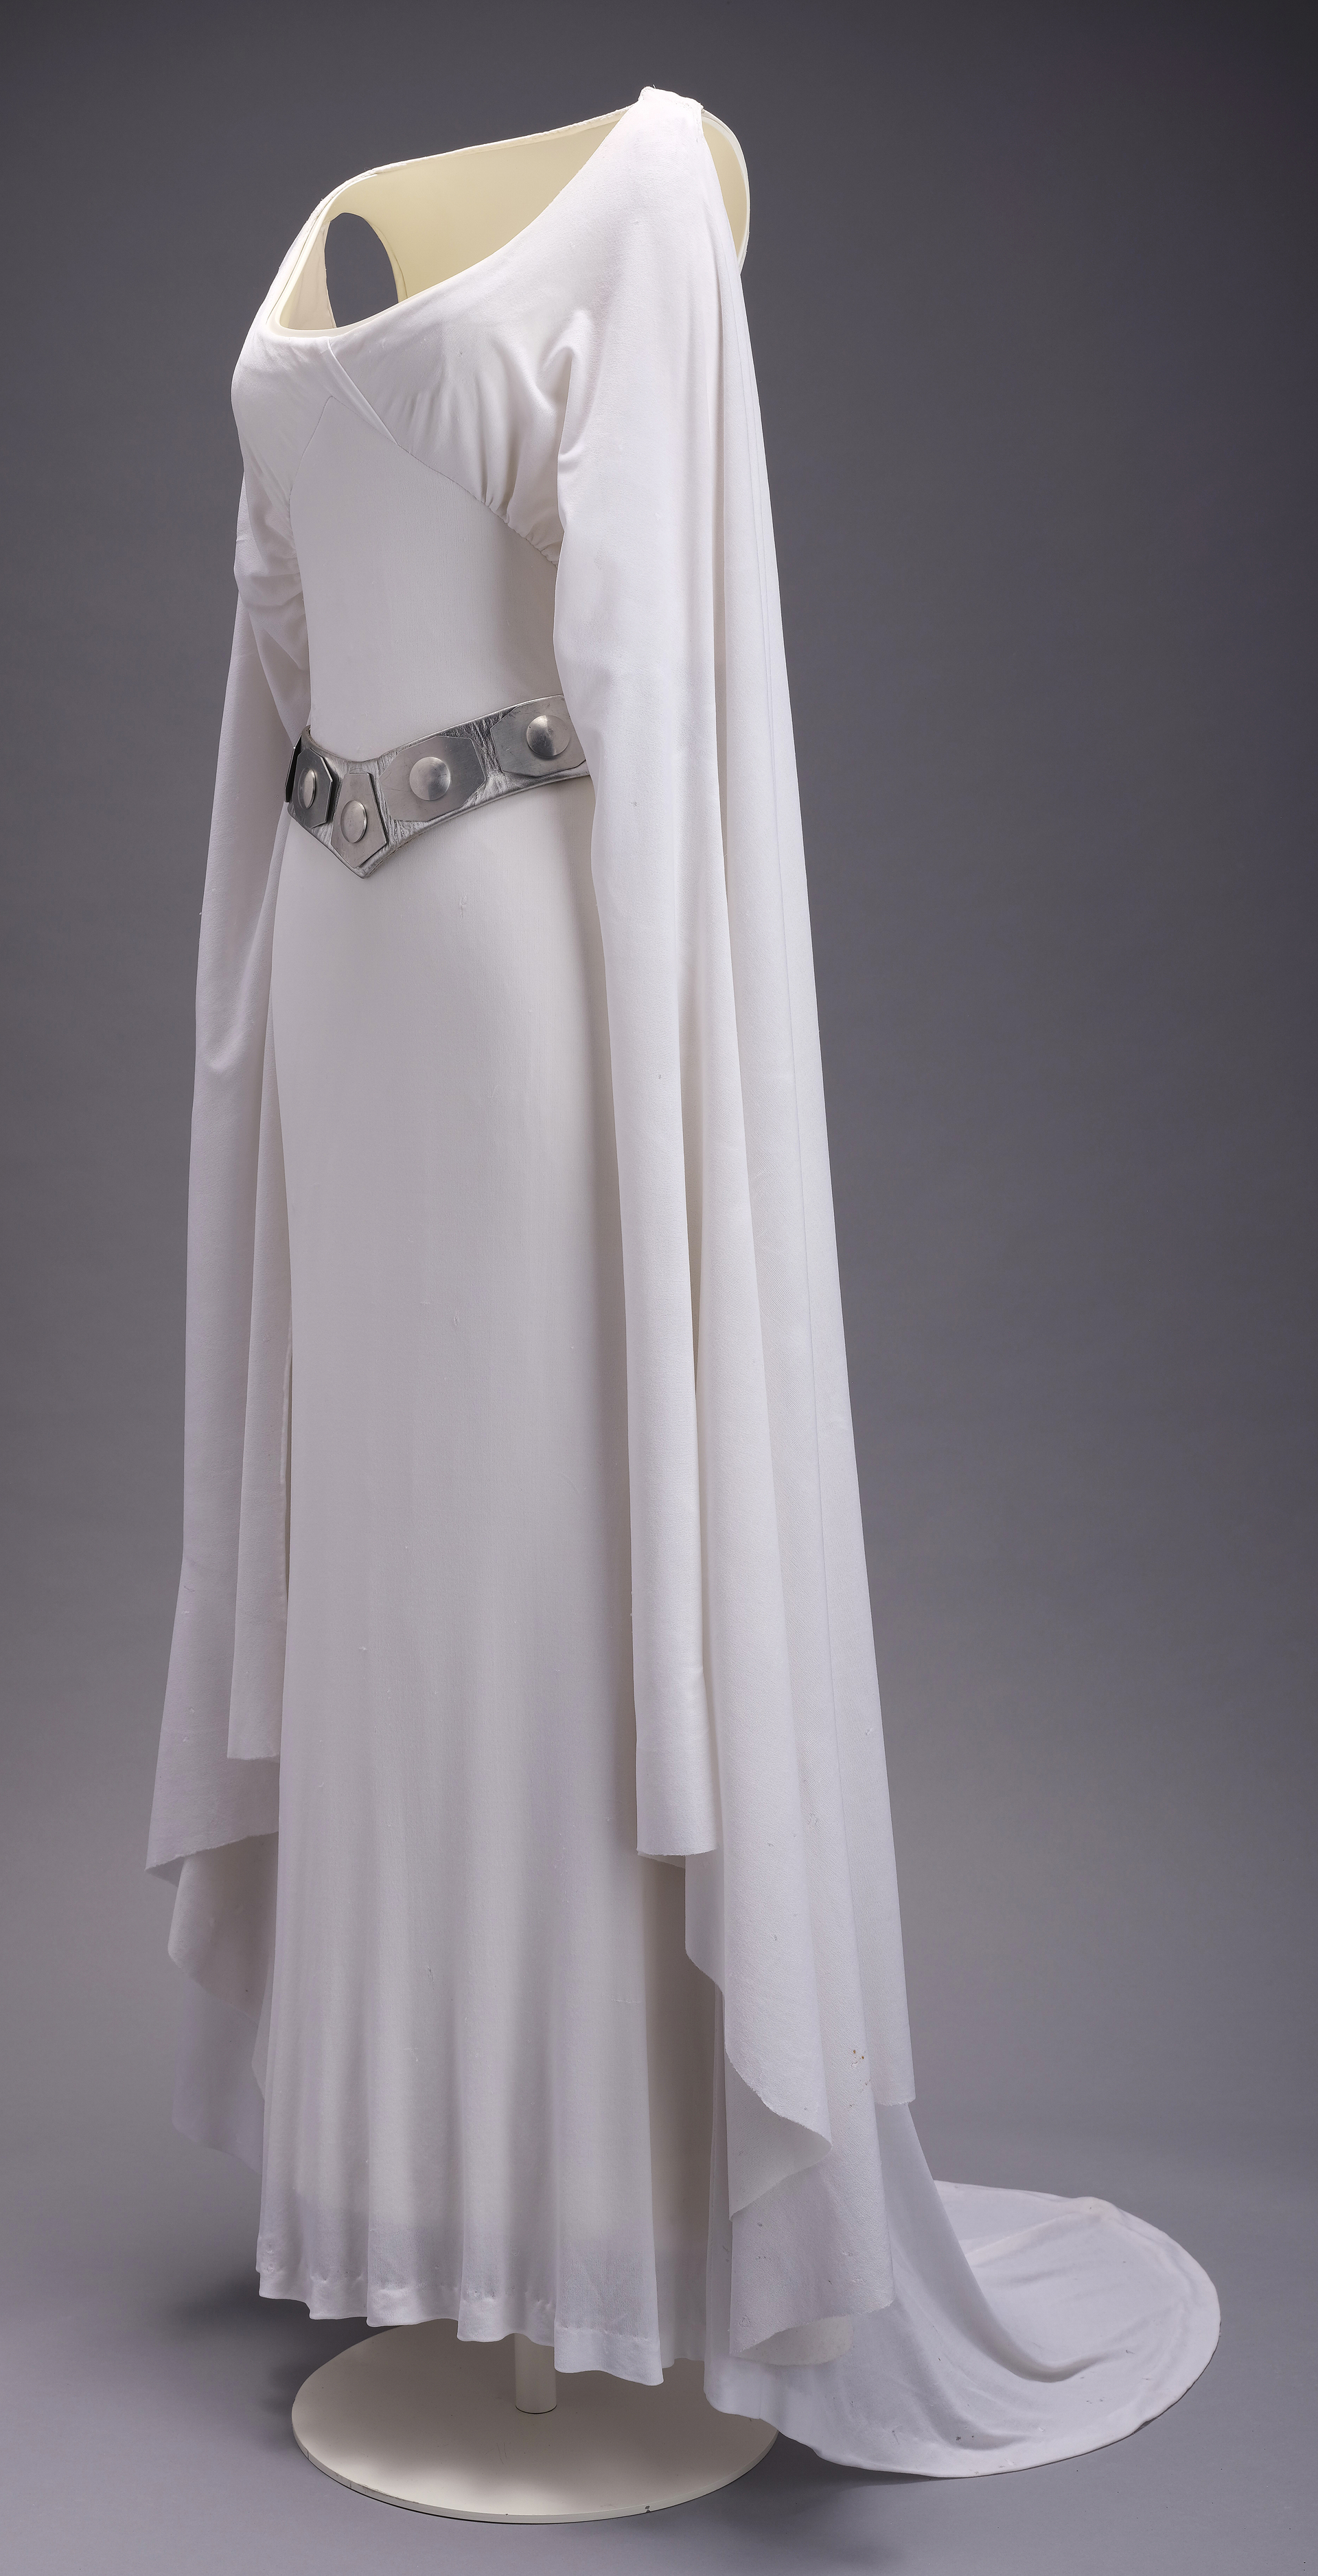 STAR WARS: A NEW HOPE (1977) - Princess Leia's (Carrie Fisher) Screen-Matched Ceremonial Dress - Image 9 of 39